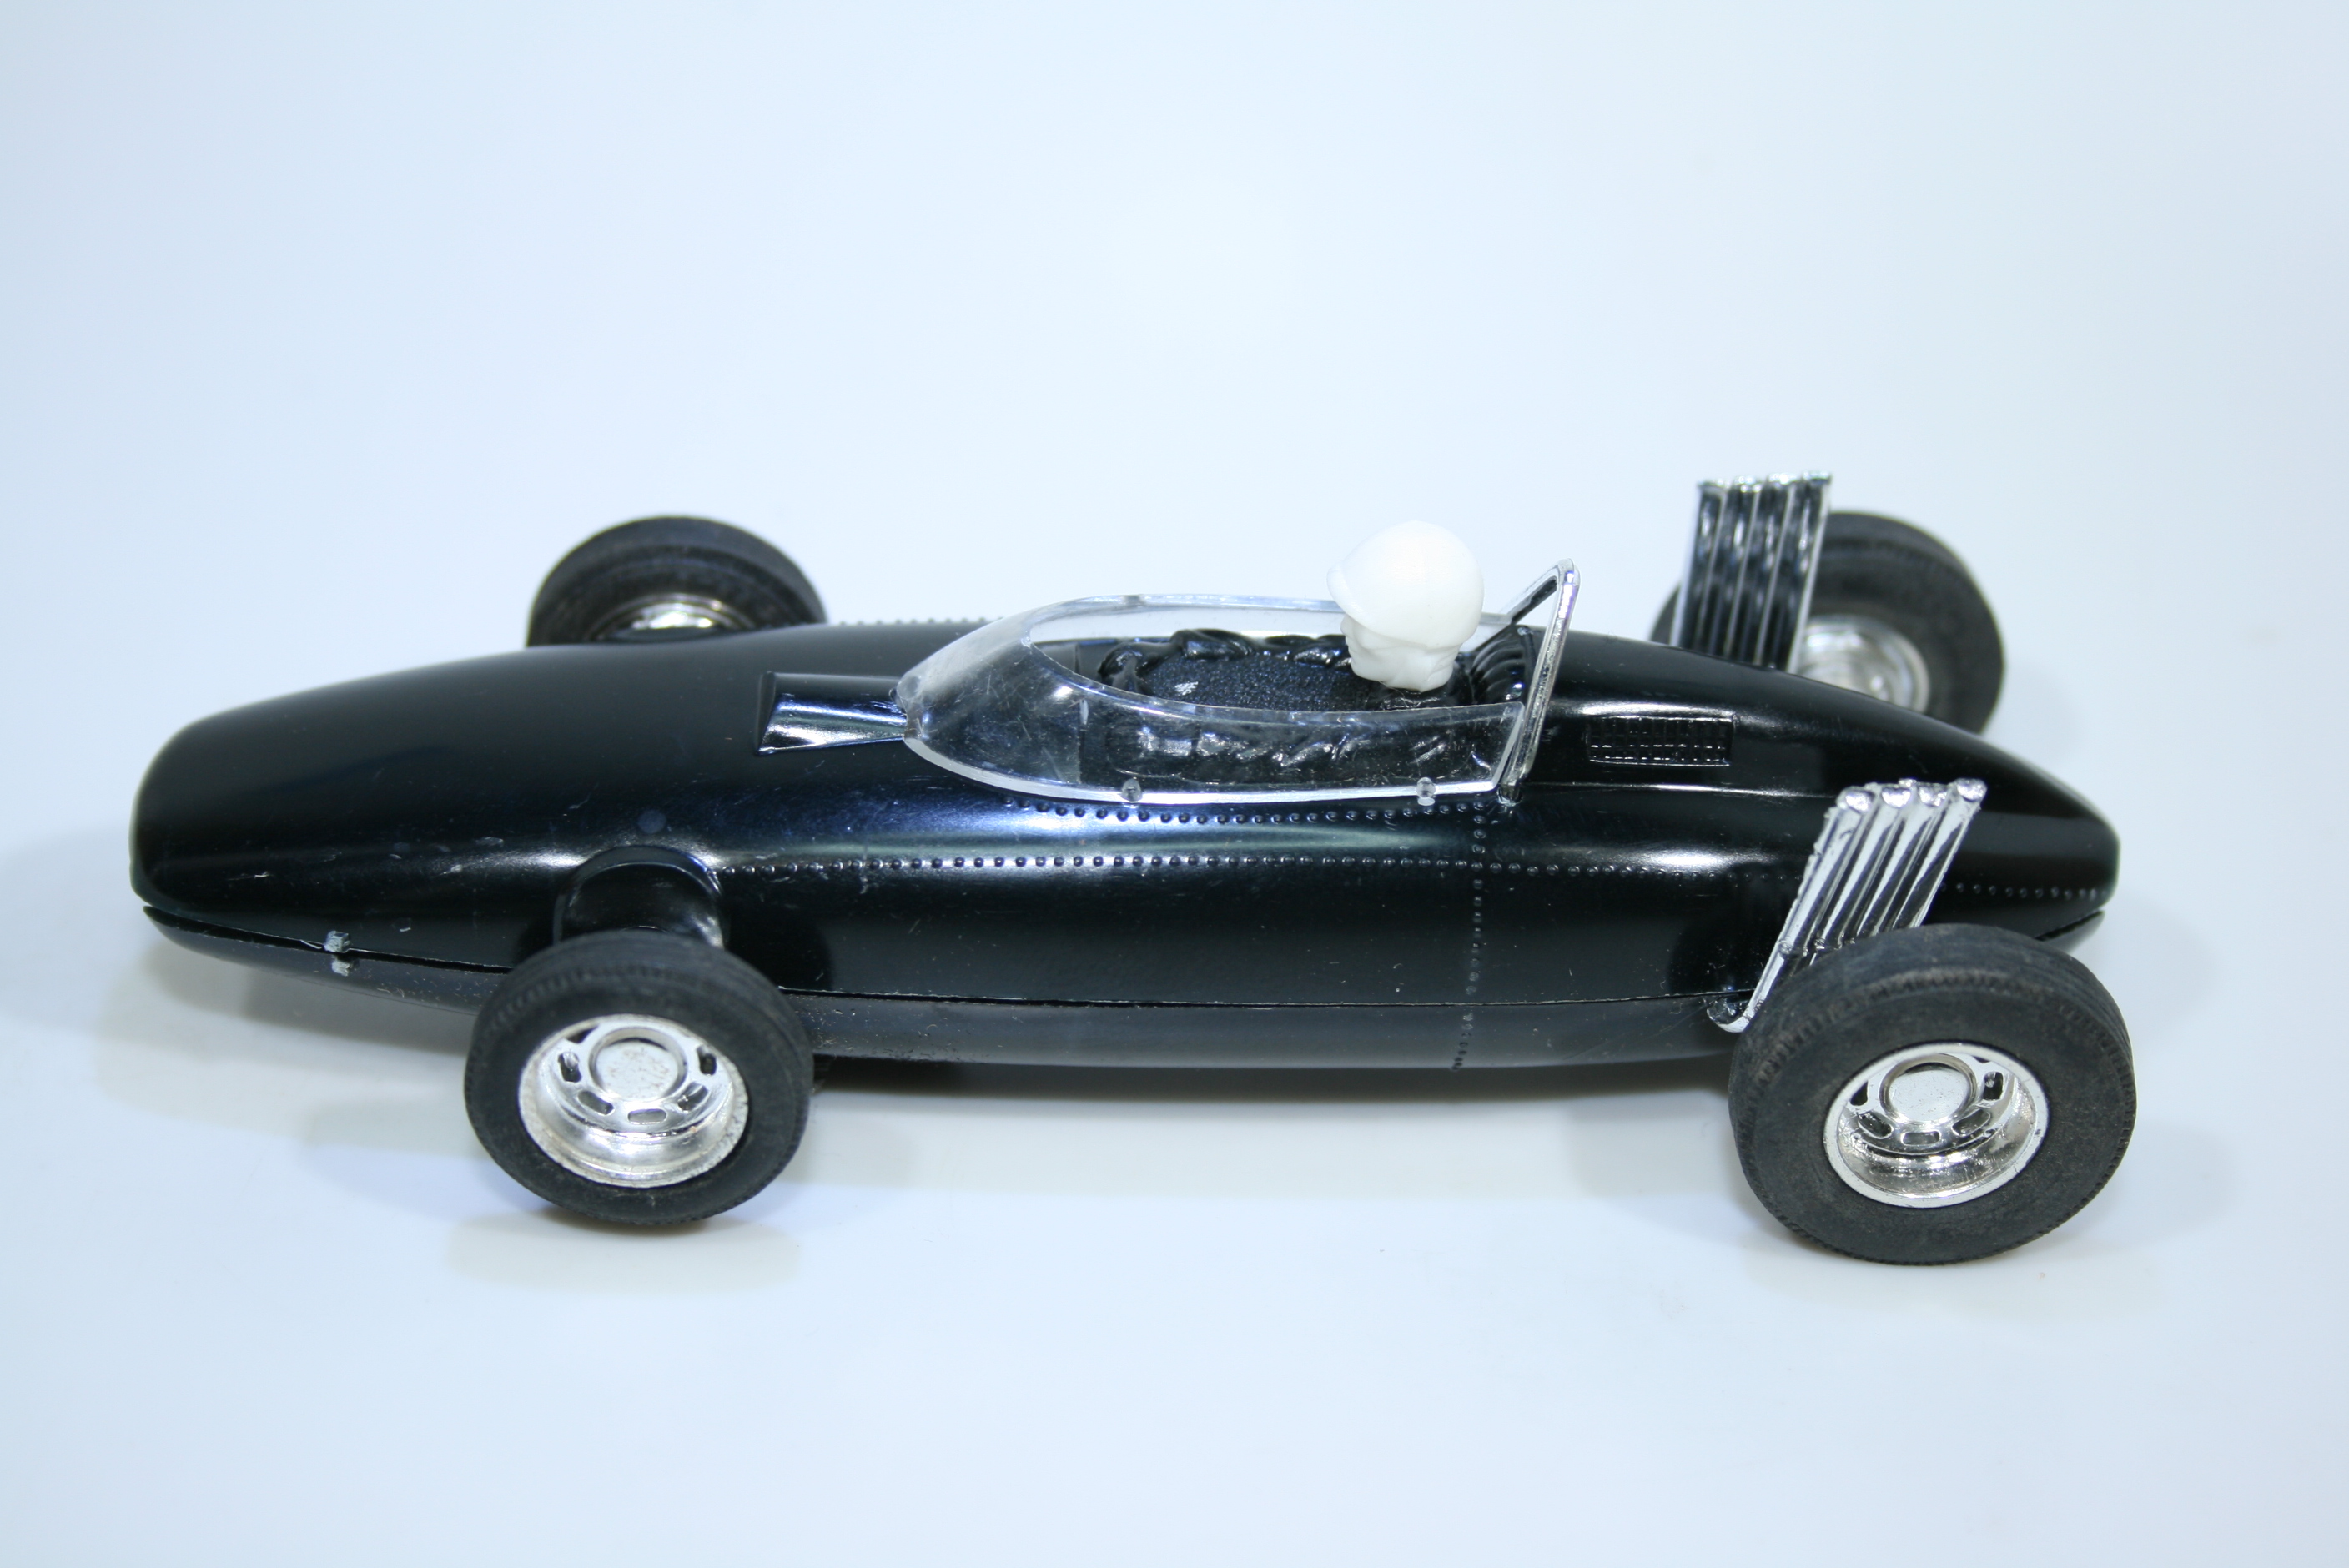 BRM Archives - KENT F1 SLOT - A Collection of F1, Single Seater 